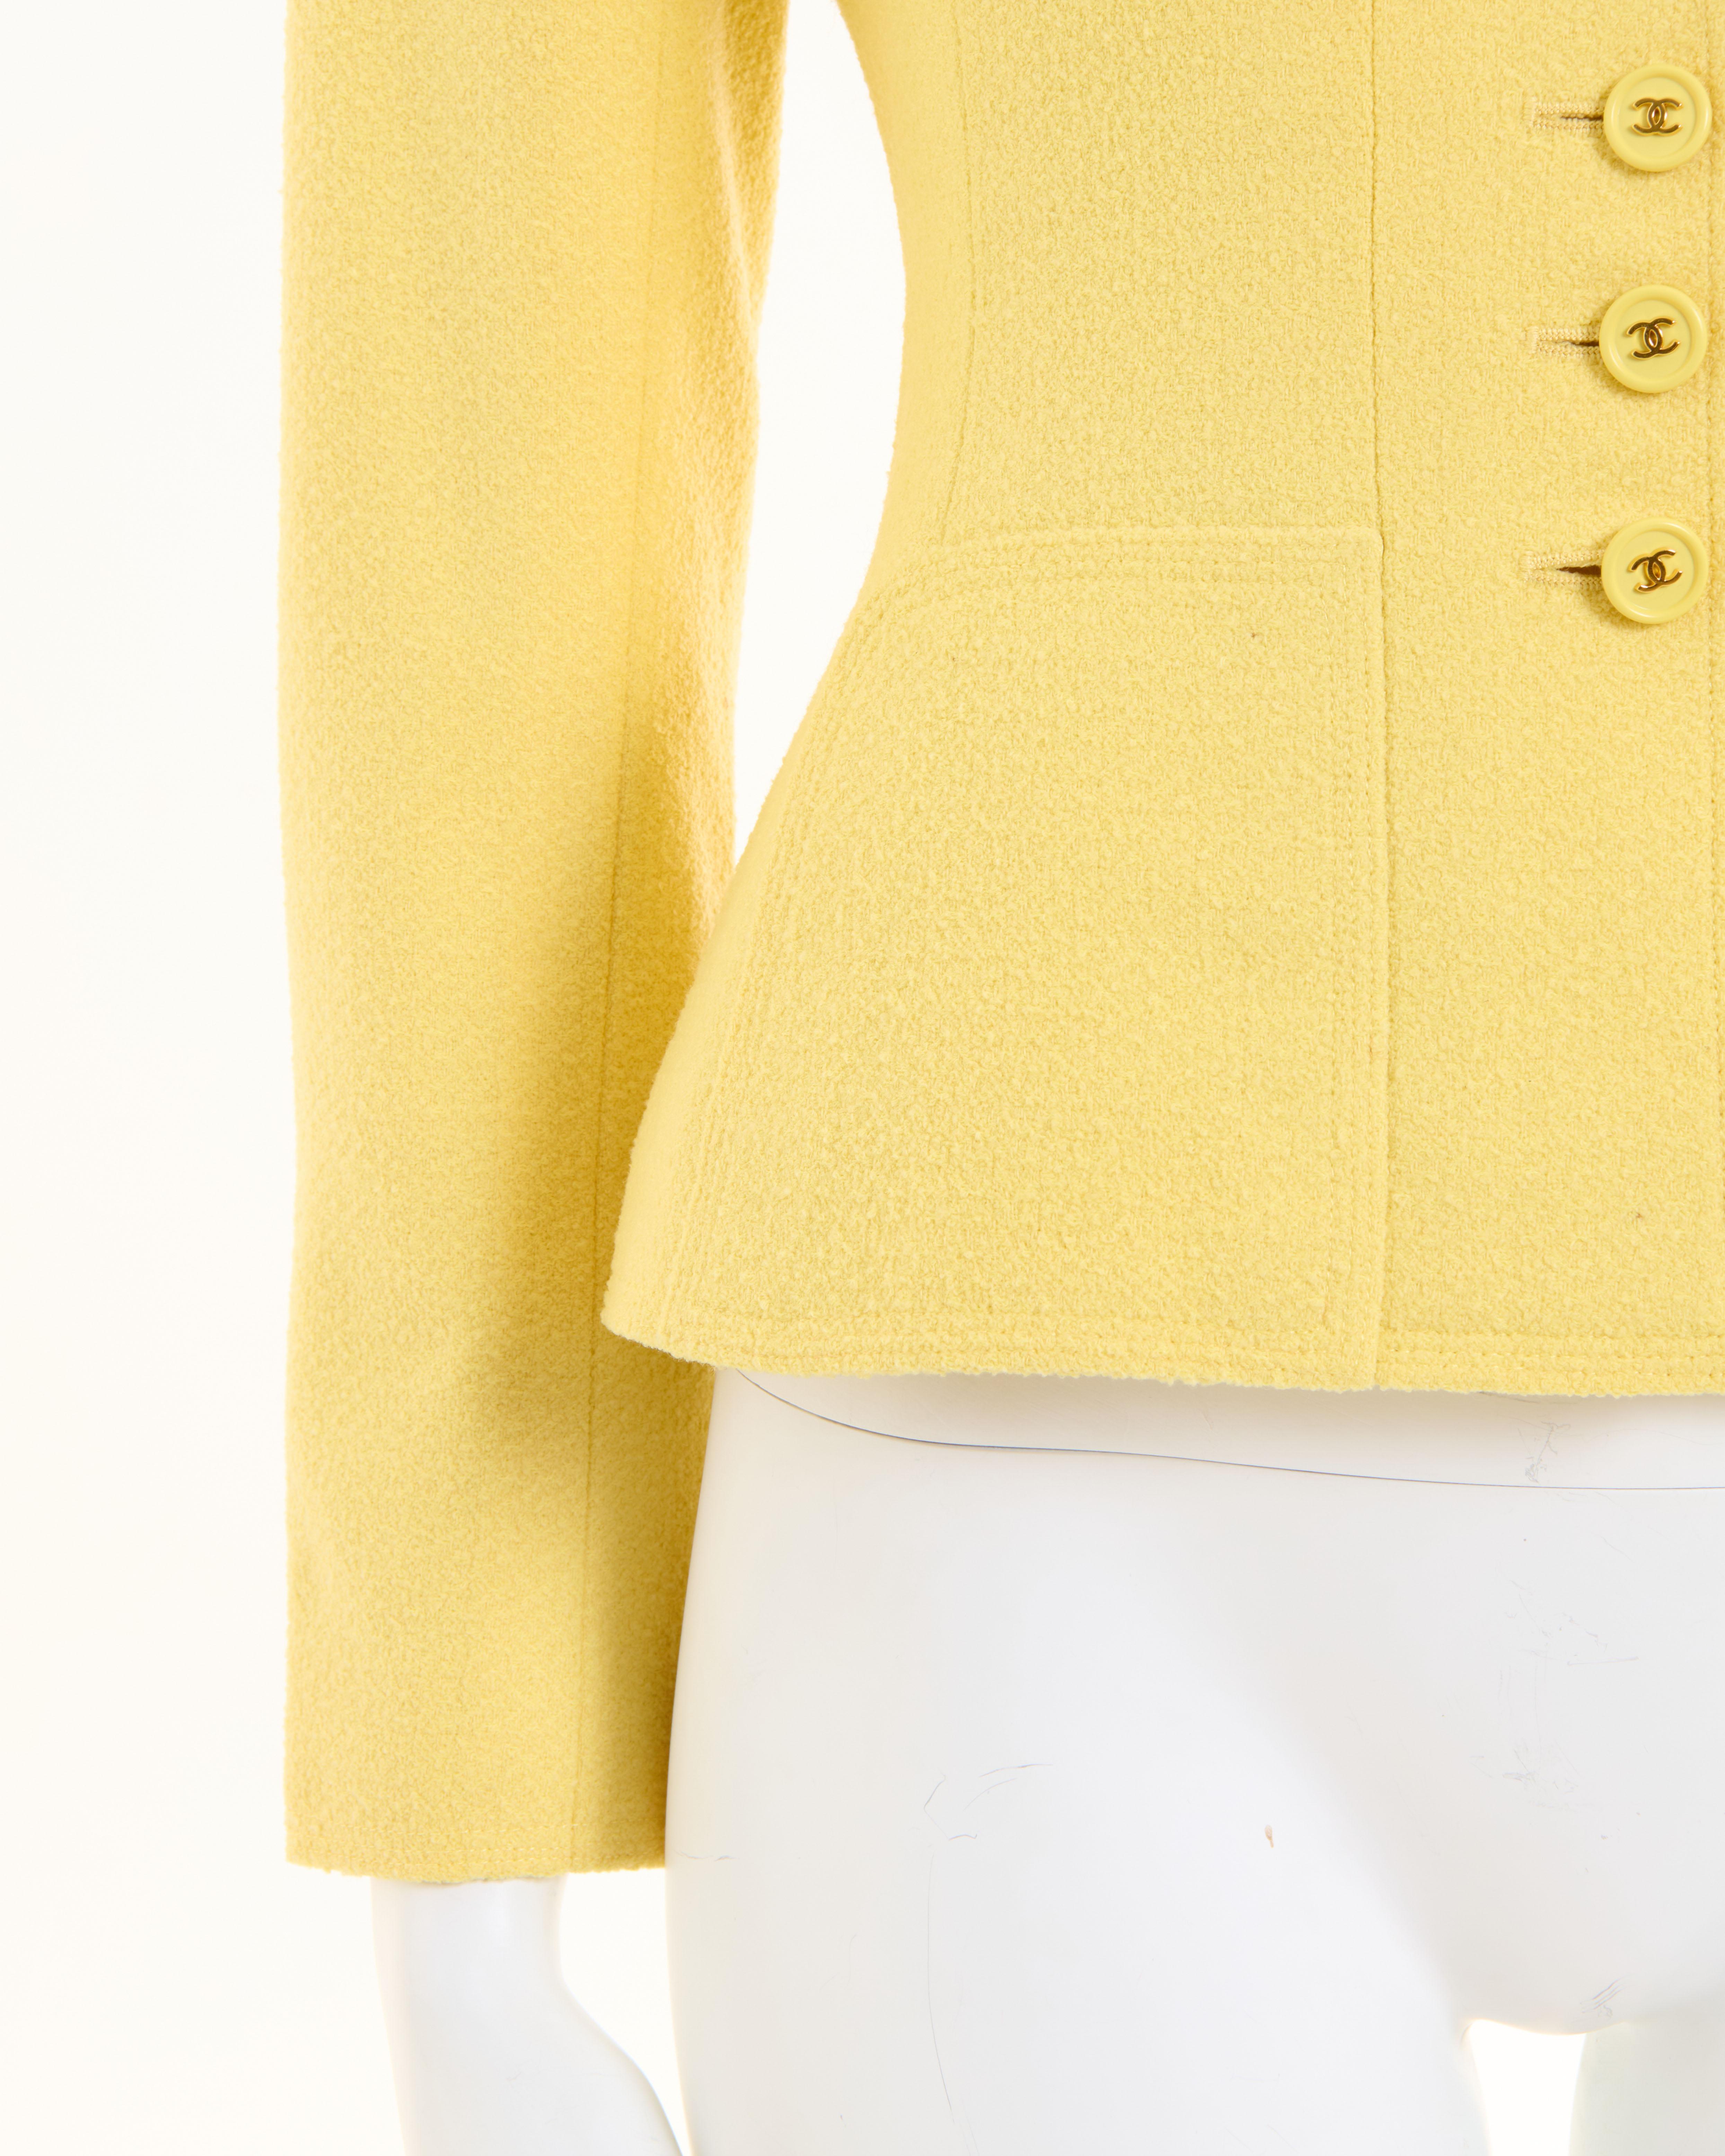 Chanel by Karl Lagerfeld S/S 1997 Yellow CC logo fitted jacket  For Sale 2